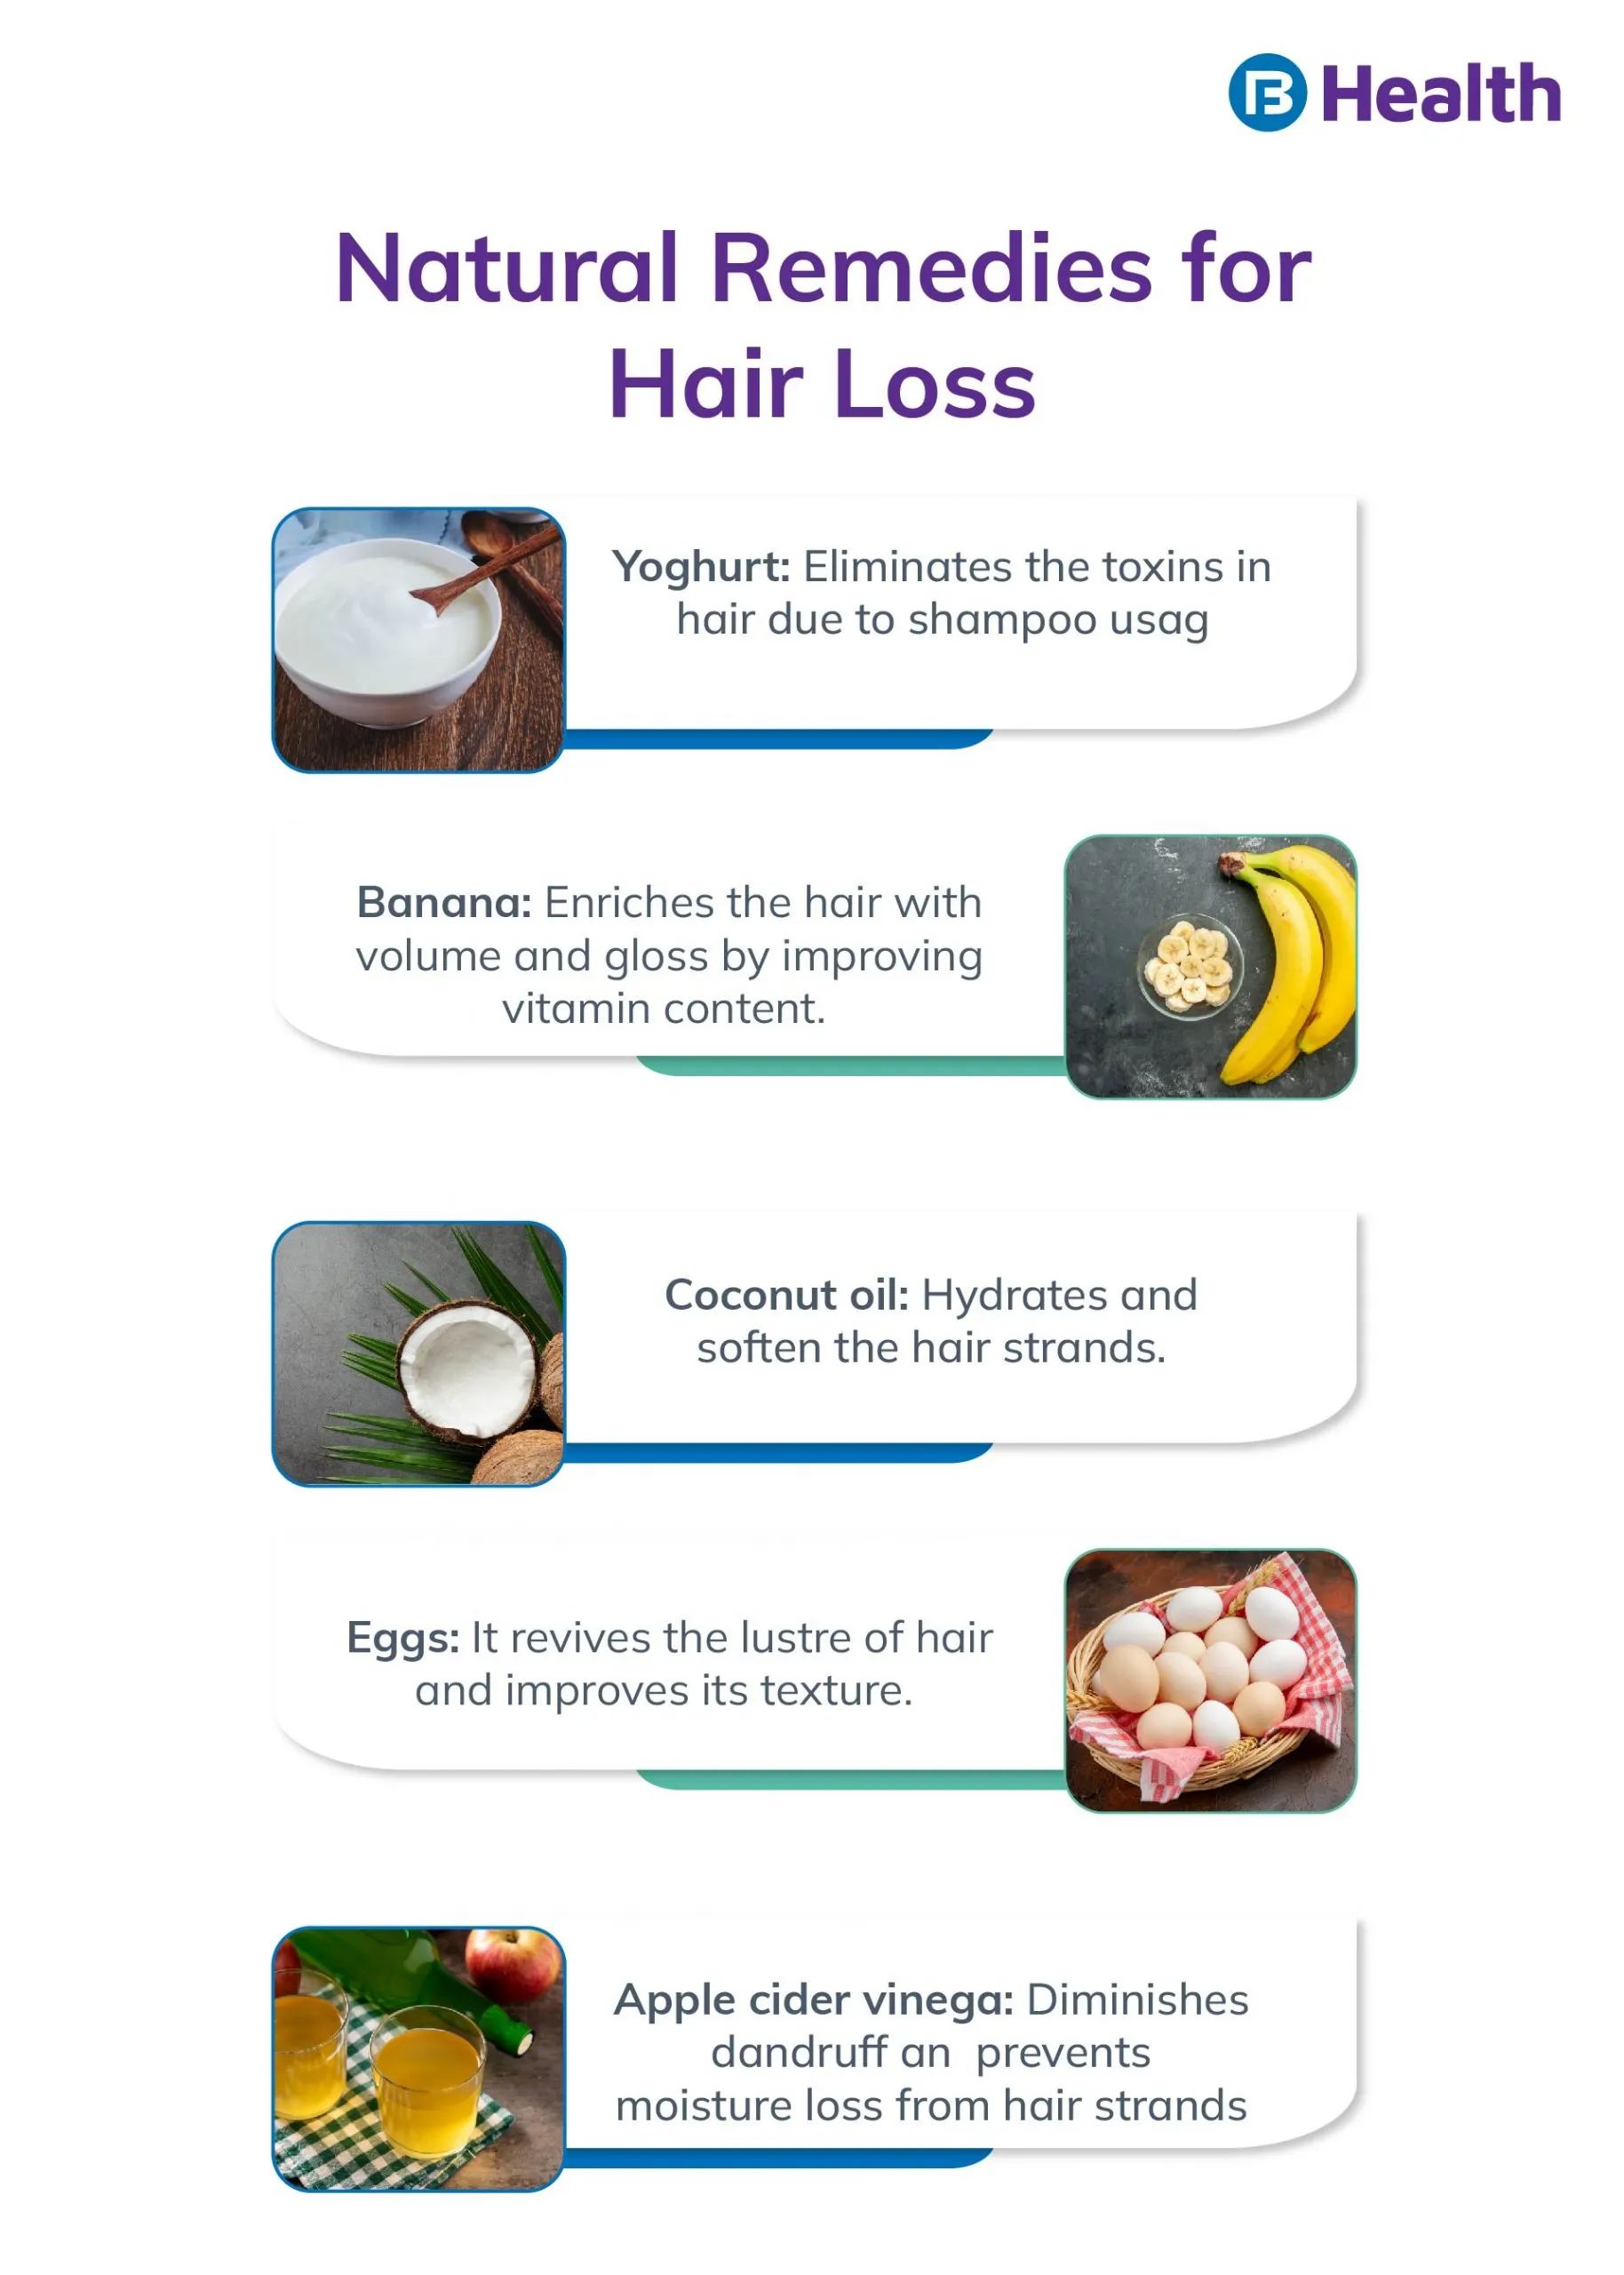 Top remedies to prevent hair loss during the rainy season.